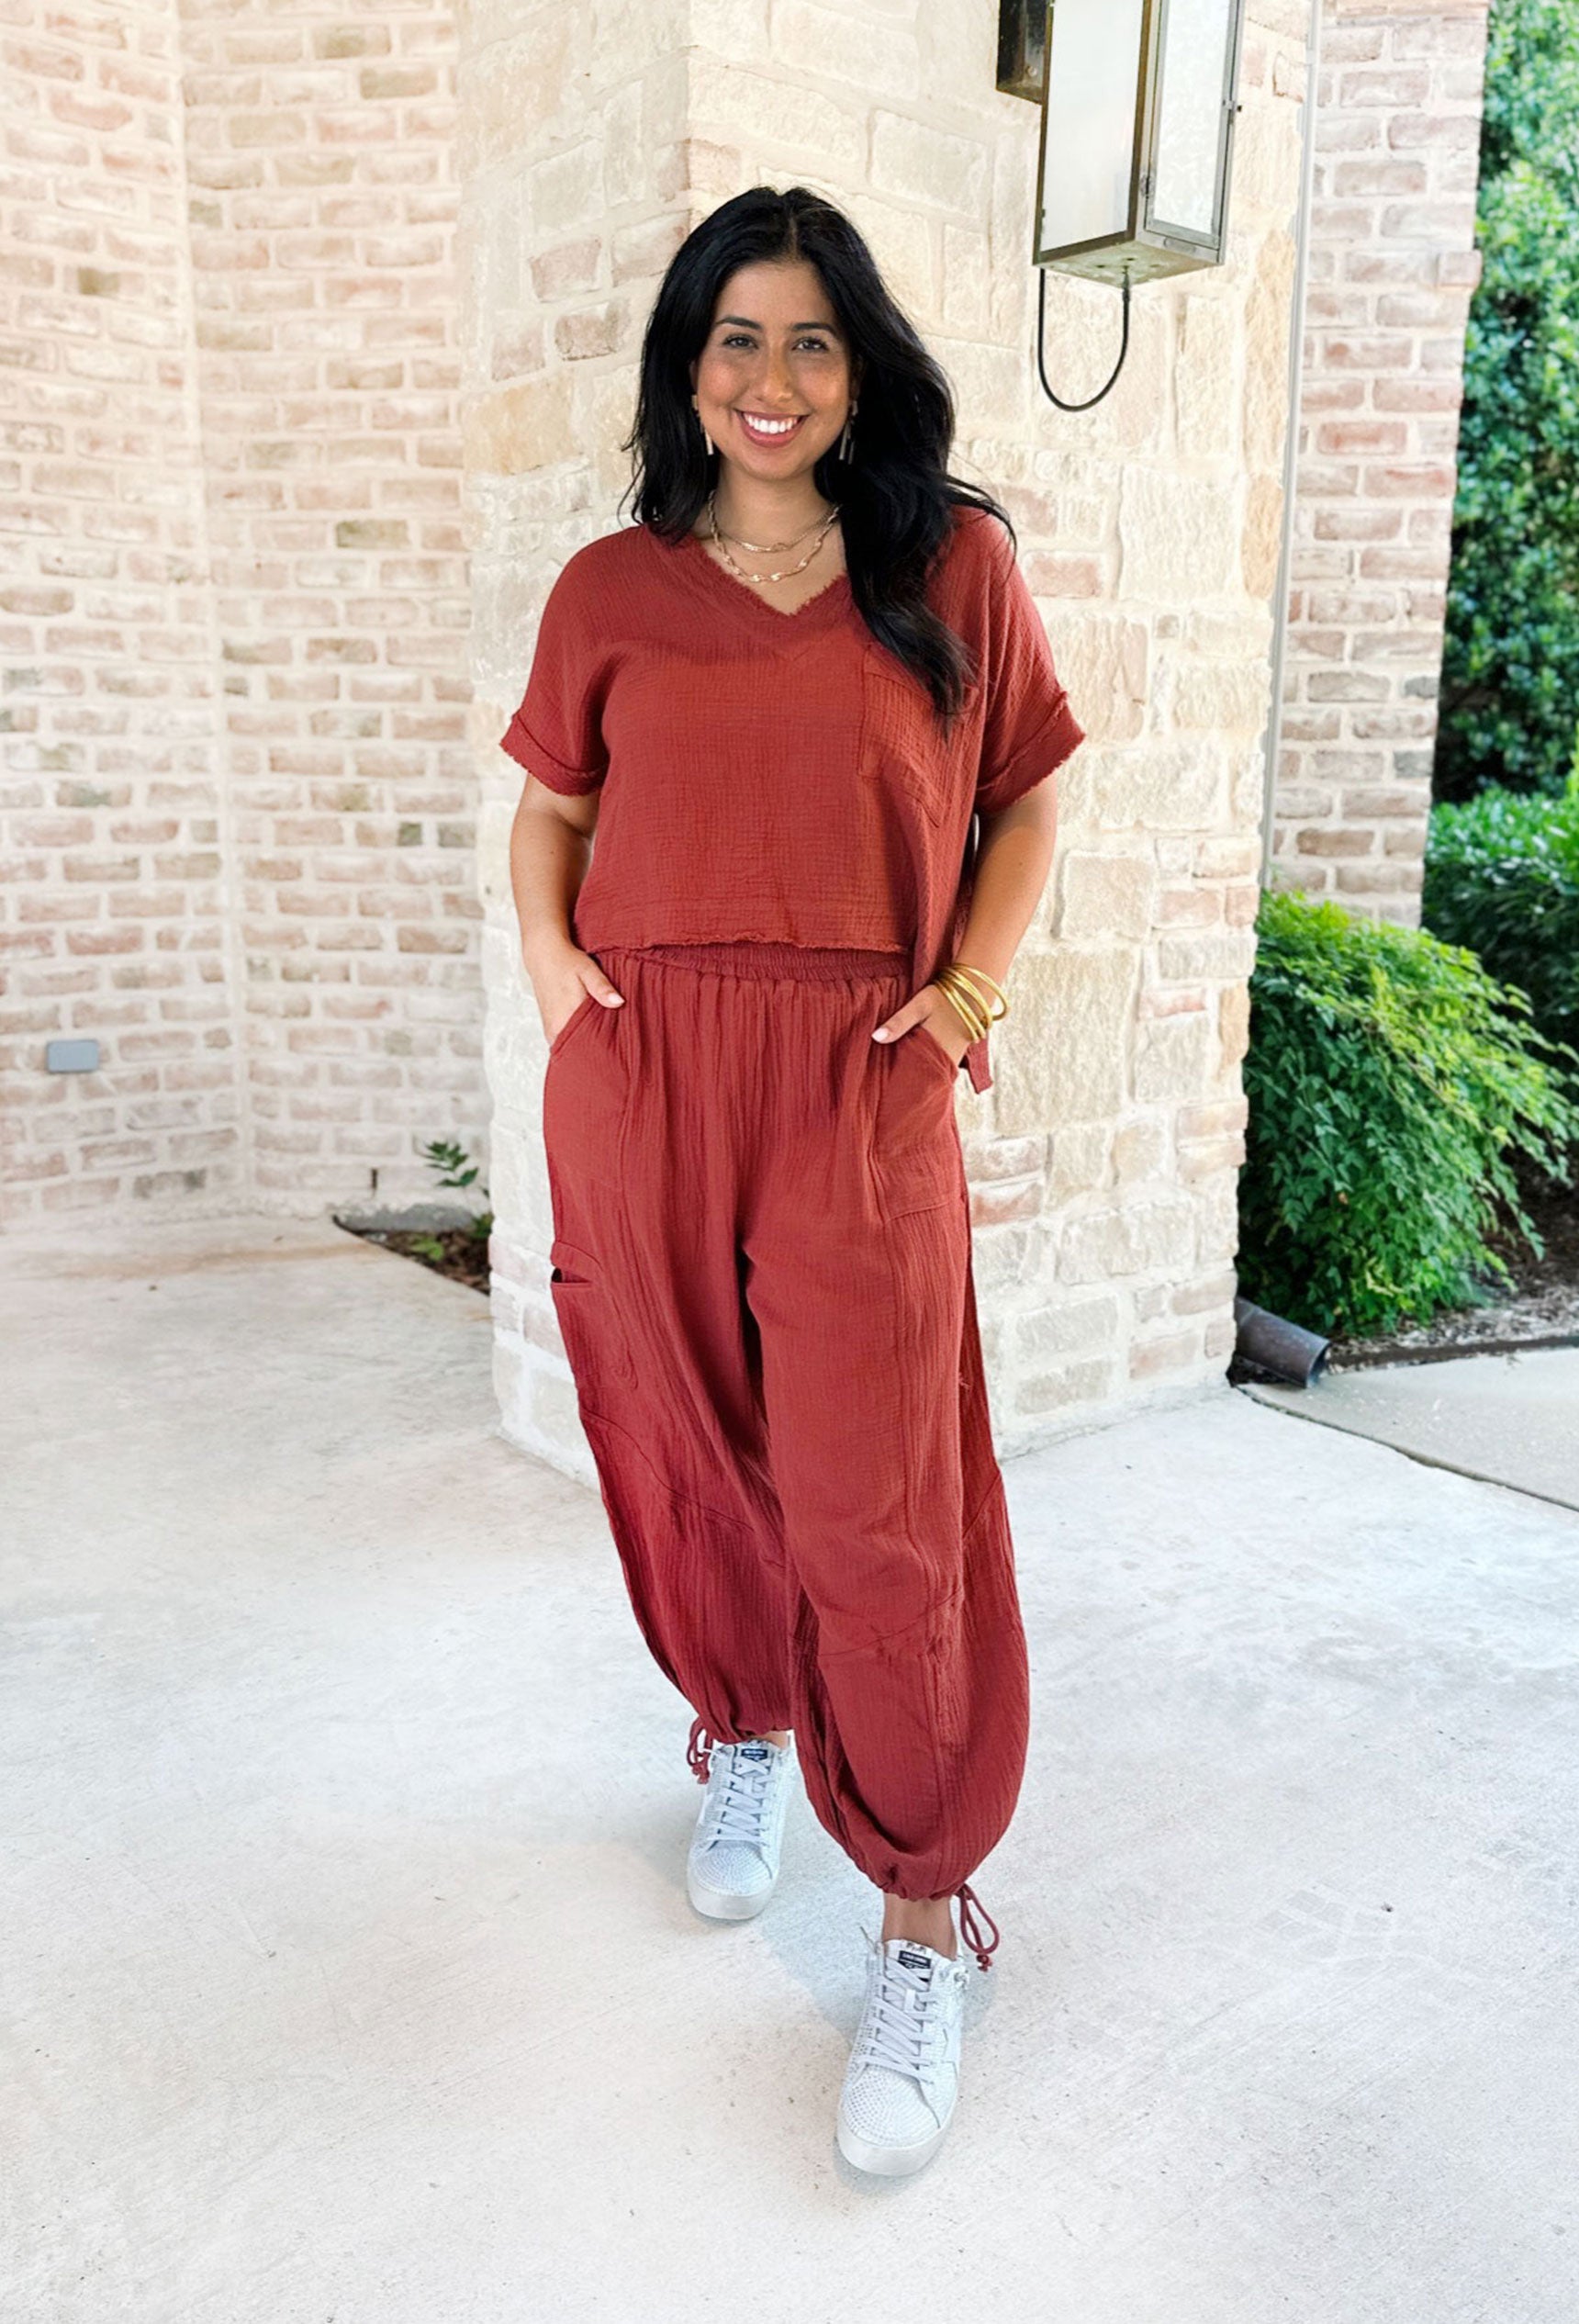 Spoke Too Soon Set, Terracotta gauze short sleeve and pant set. Top has a textured hem along with a front pocket and soft v-neck line. Pants are a jogger/cargo style with drawstrings on the ankles and multiple pockets.